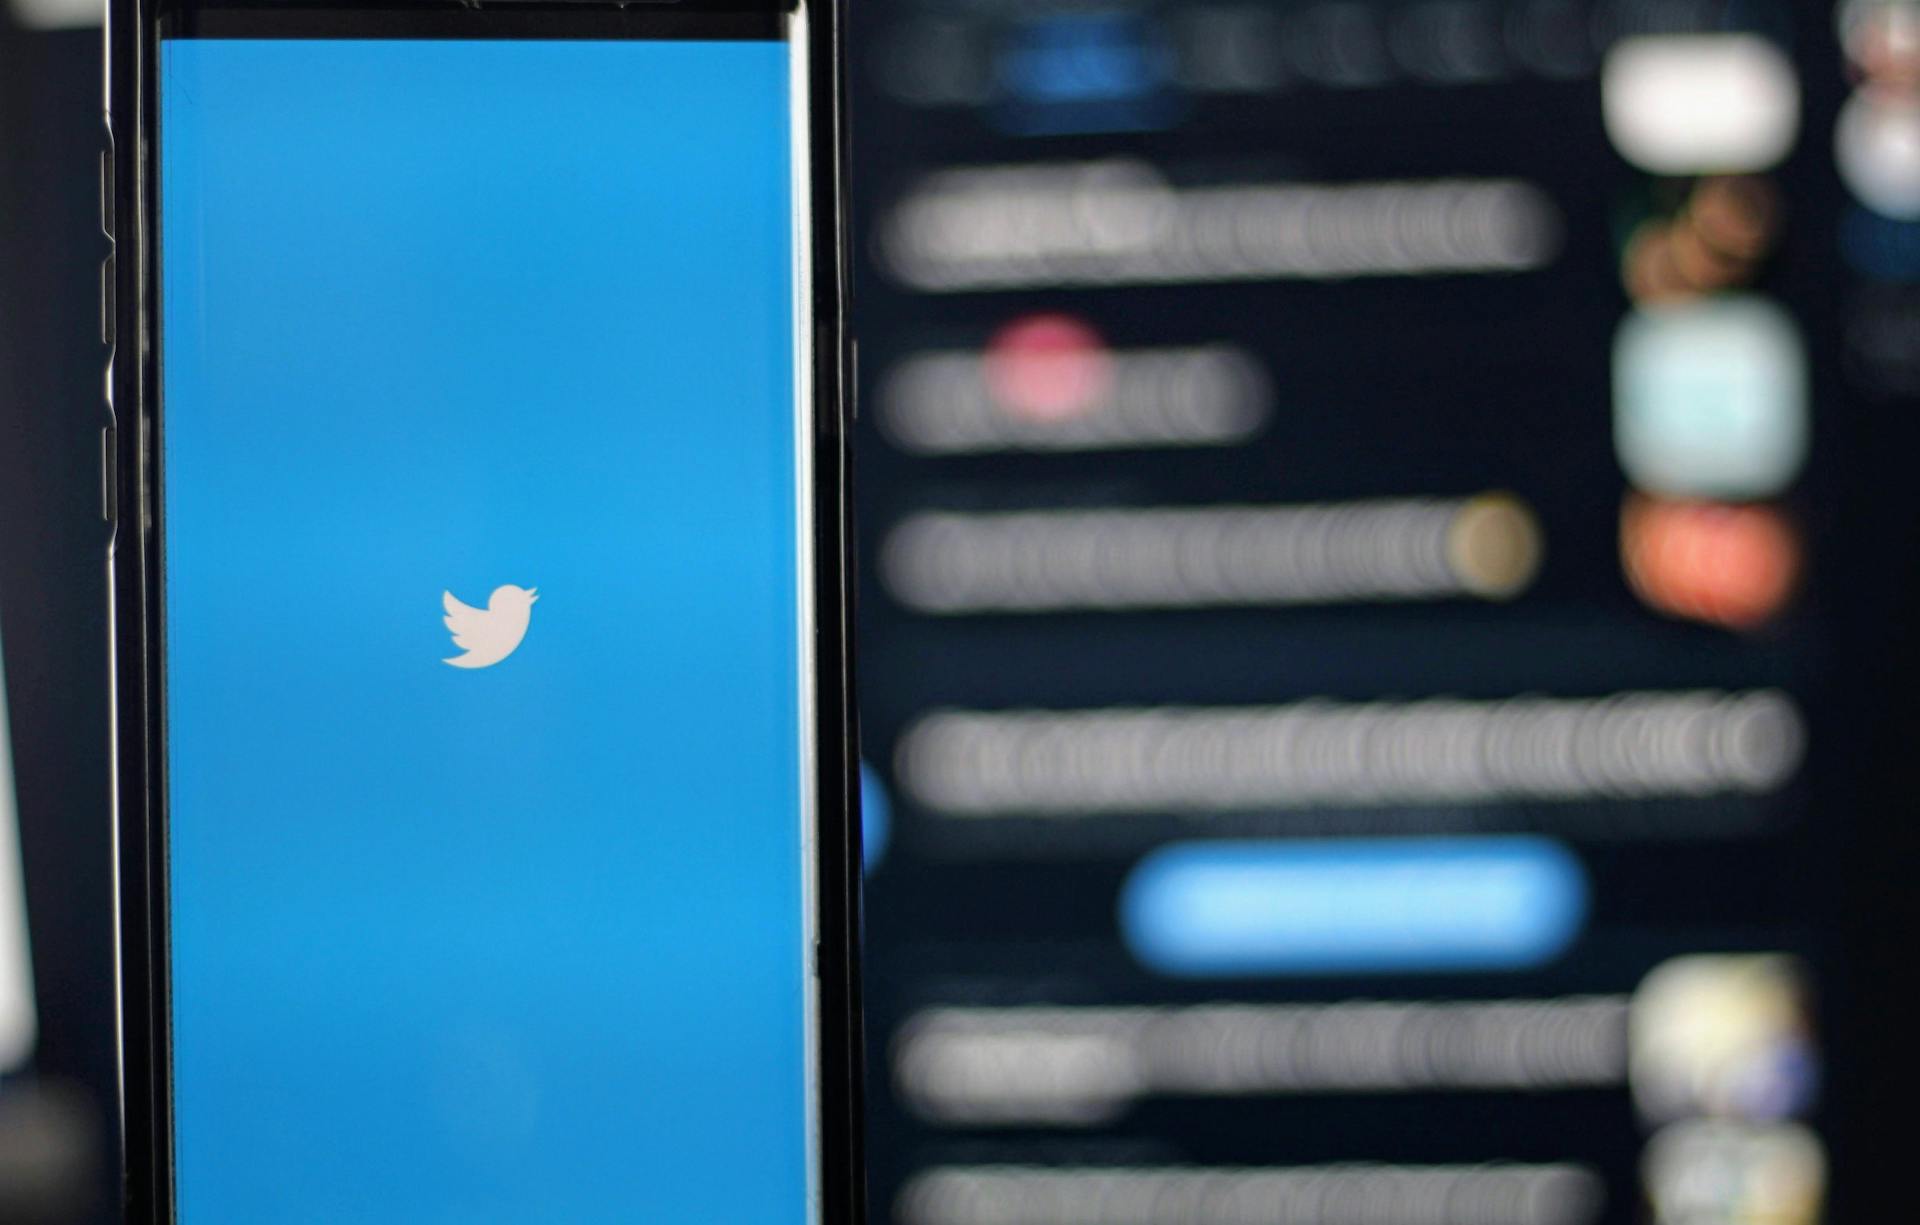 Phone screen showing Twitter logo next to out of focus Twitter home screen